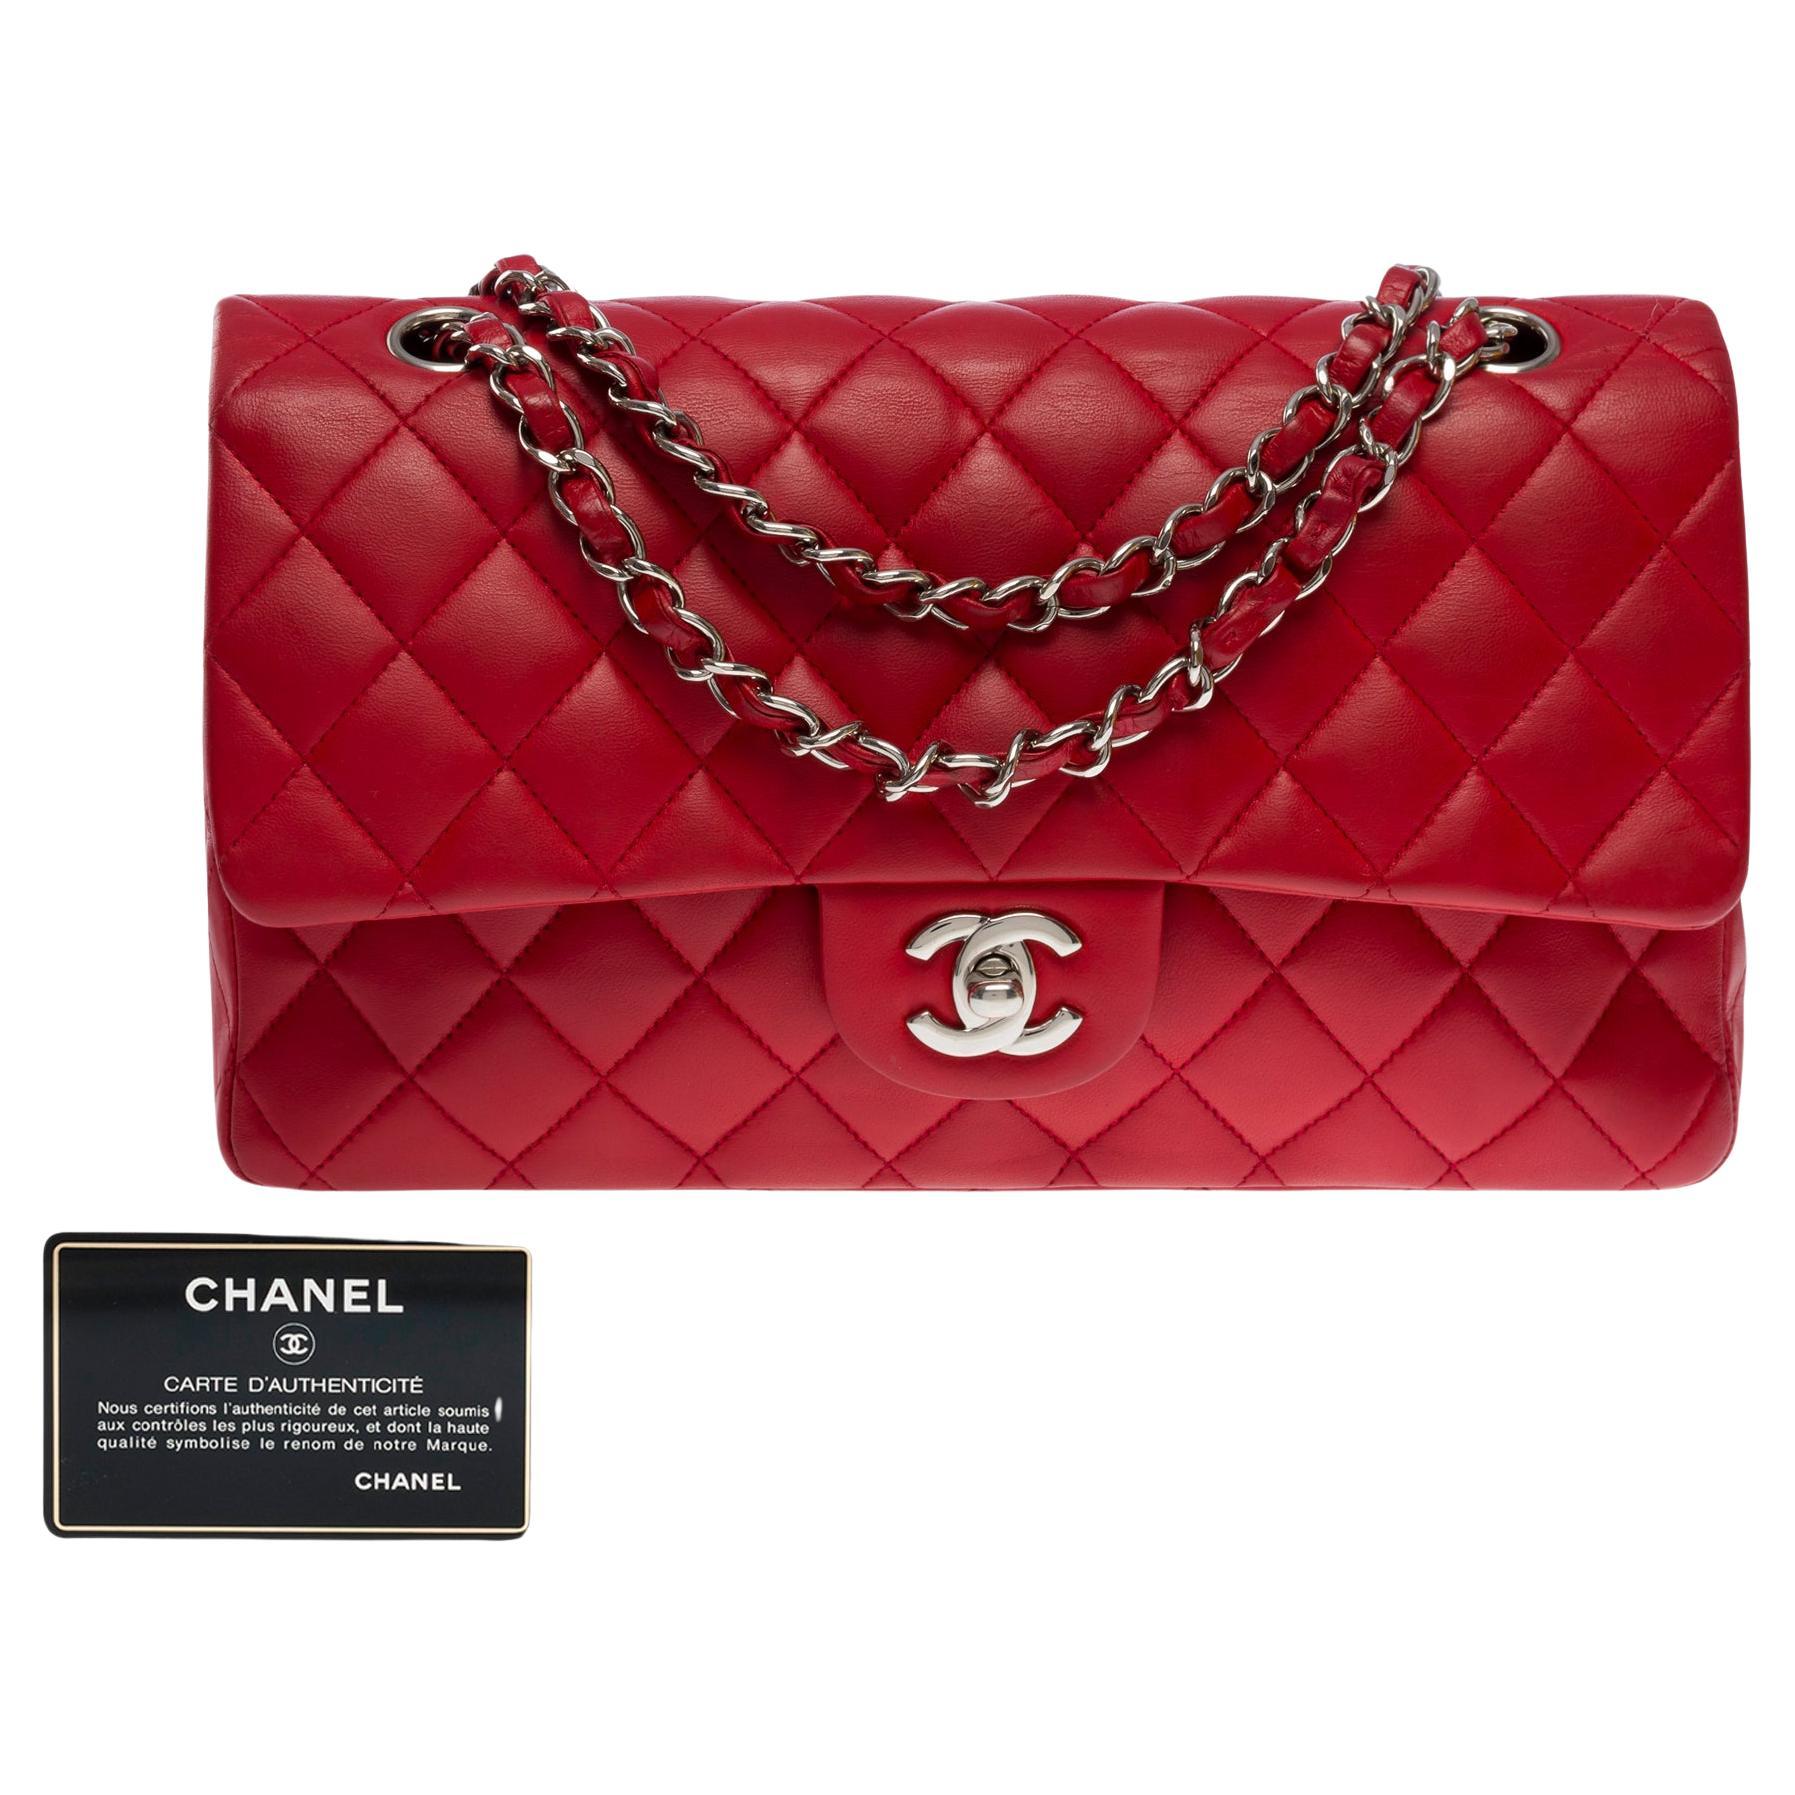 Chanel Timeless Medium double flap shoulder bag in Red lambskin leather, SHW For Sale